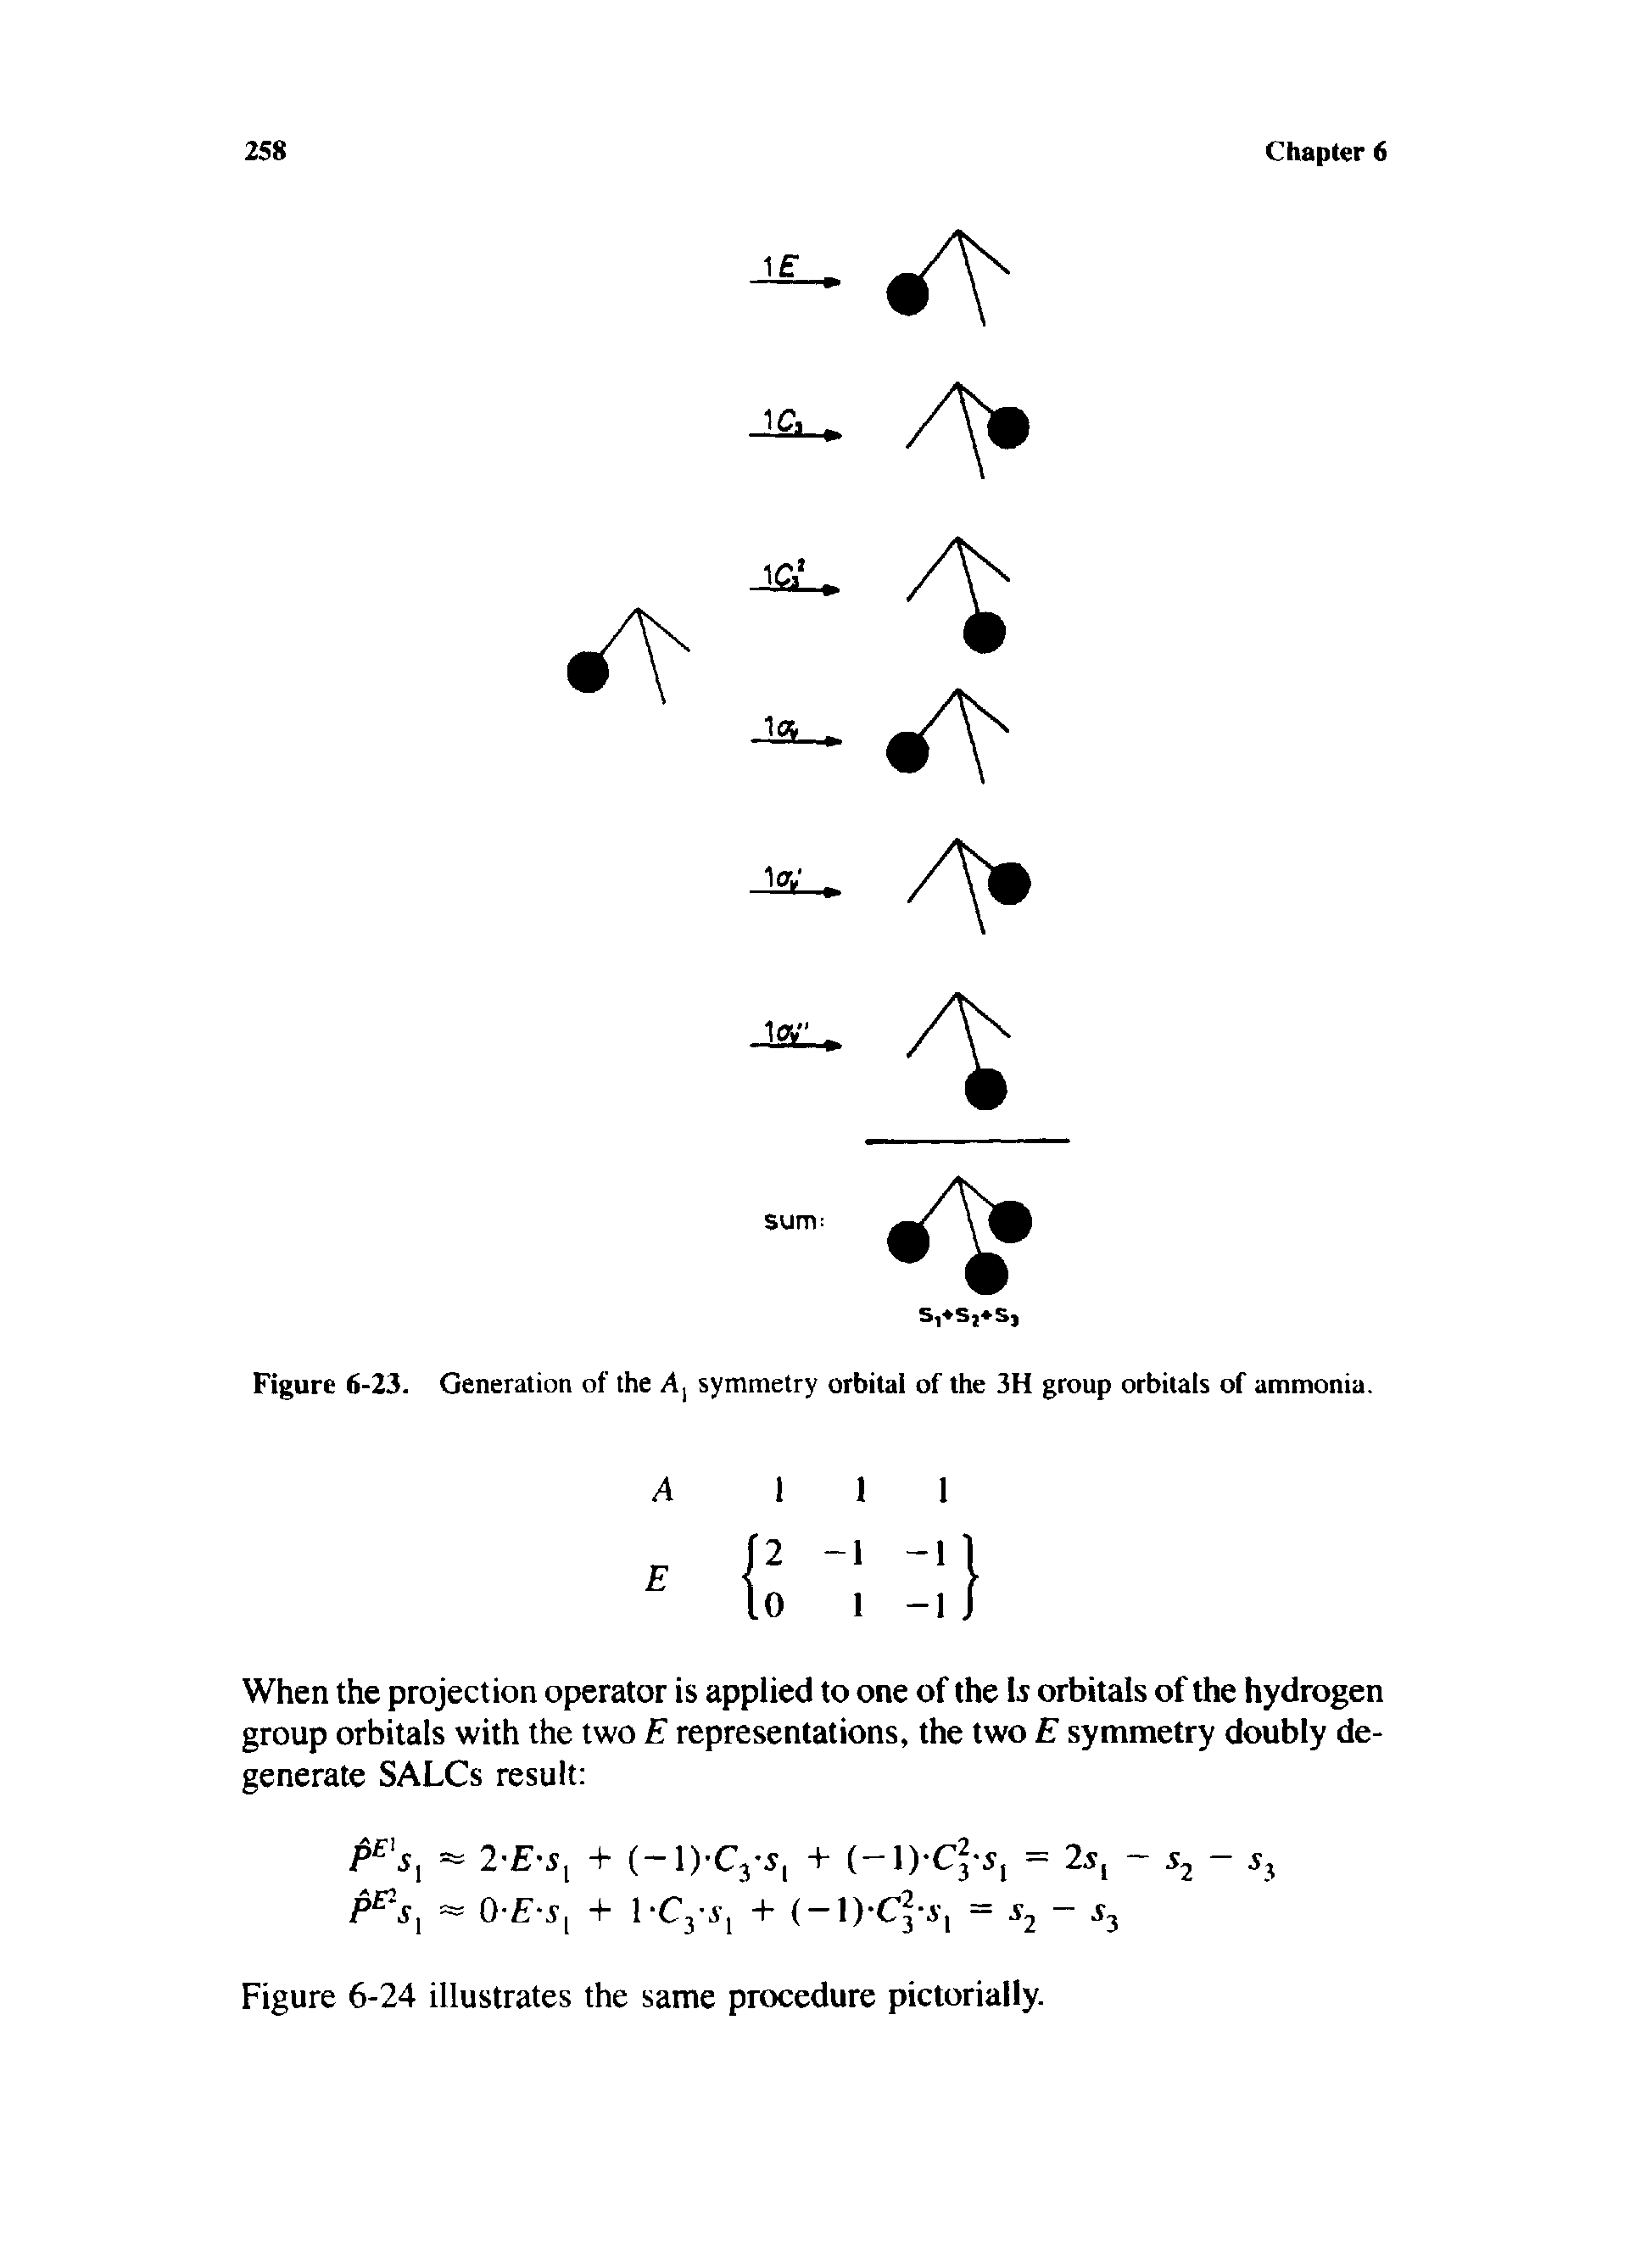 Figure 6-23. Generation of the A, symmetry orbital of the 3H group orbitals of ammonia.